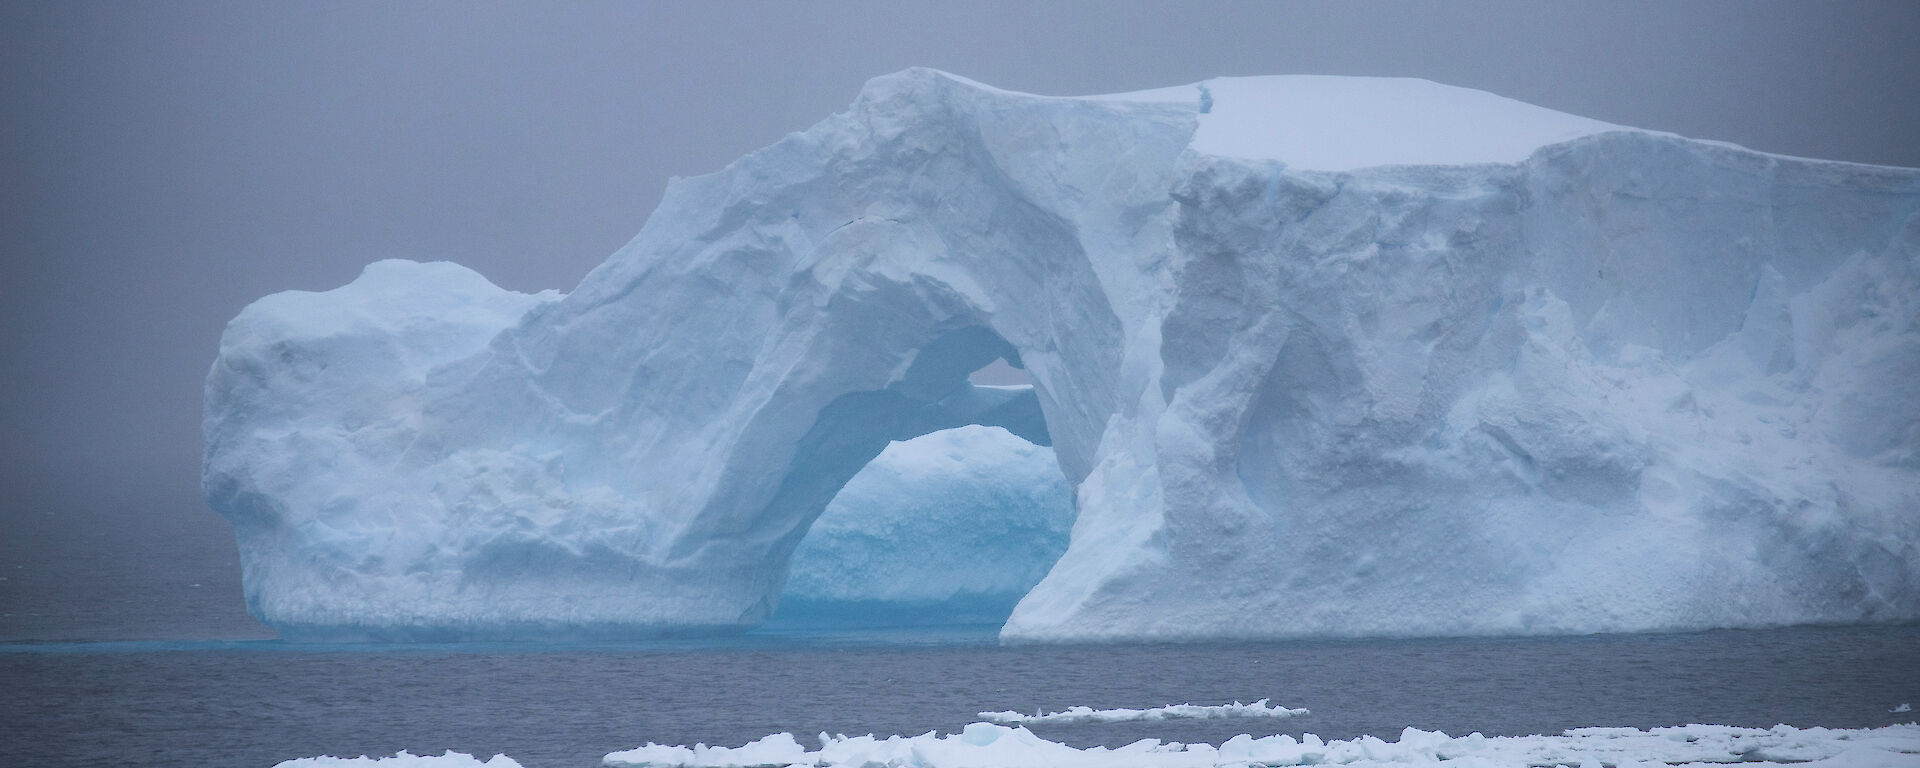 An iceberg shaped like a bridge with a hollow entrance can be seen on an overrcast day